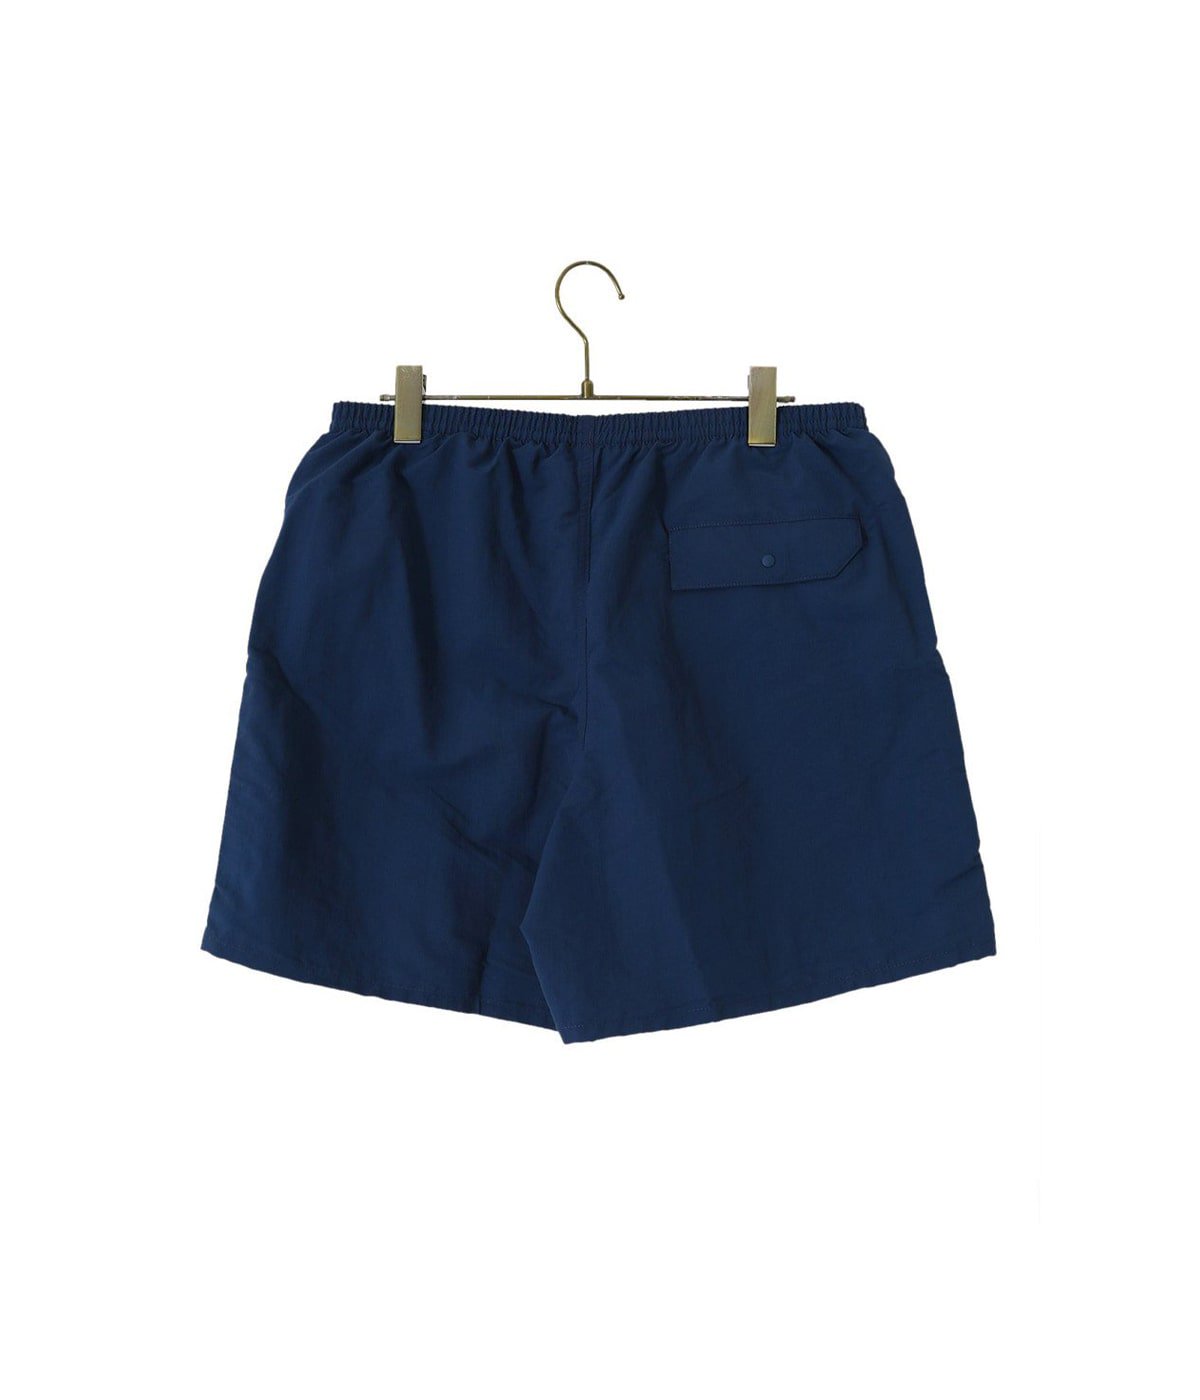 M's Baggies Shorts - 5 in -BLK-